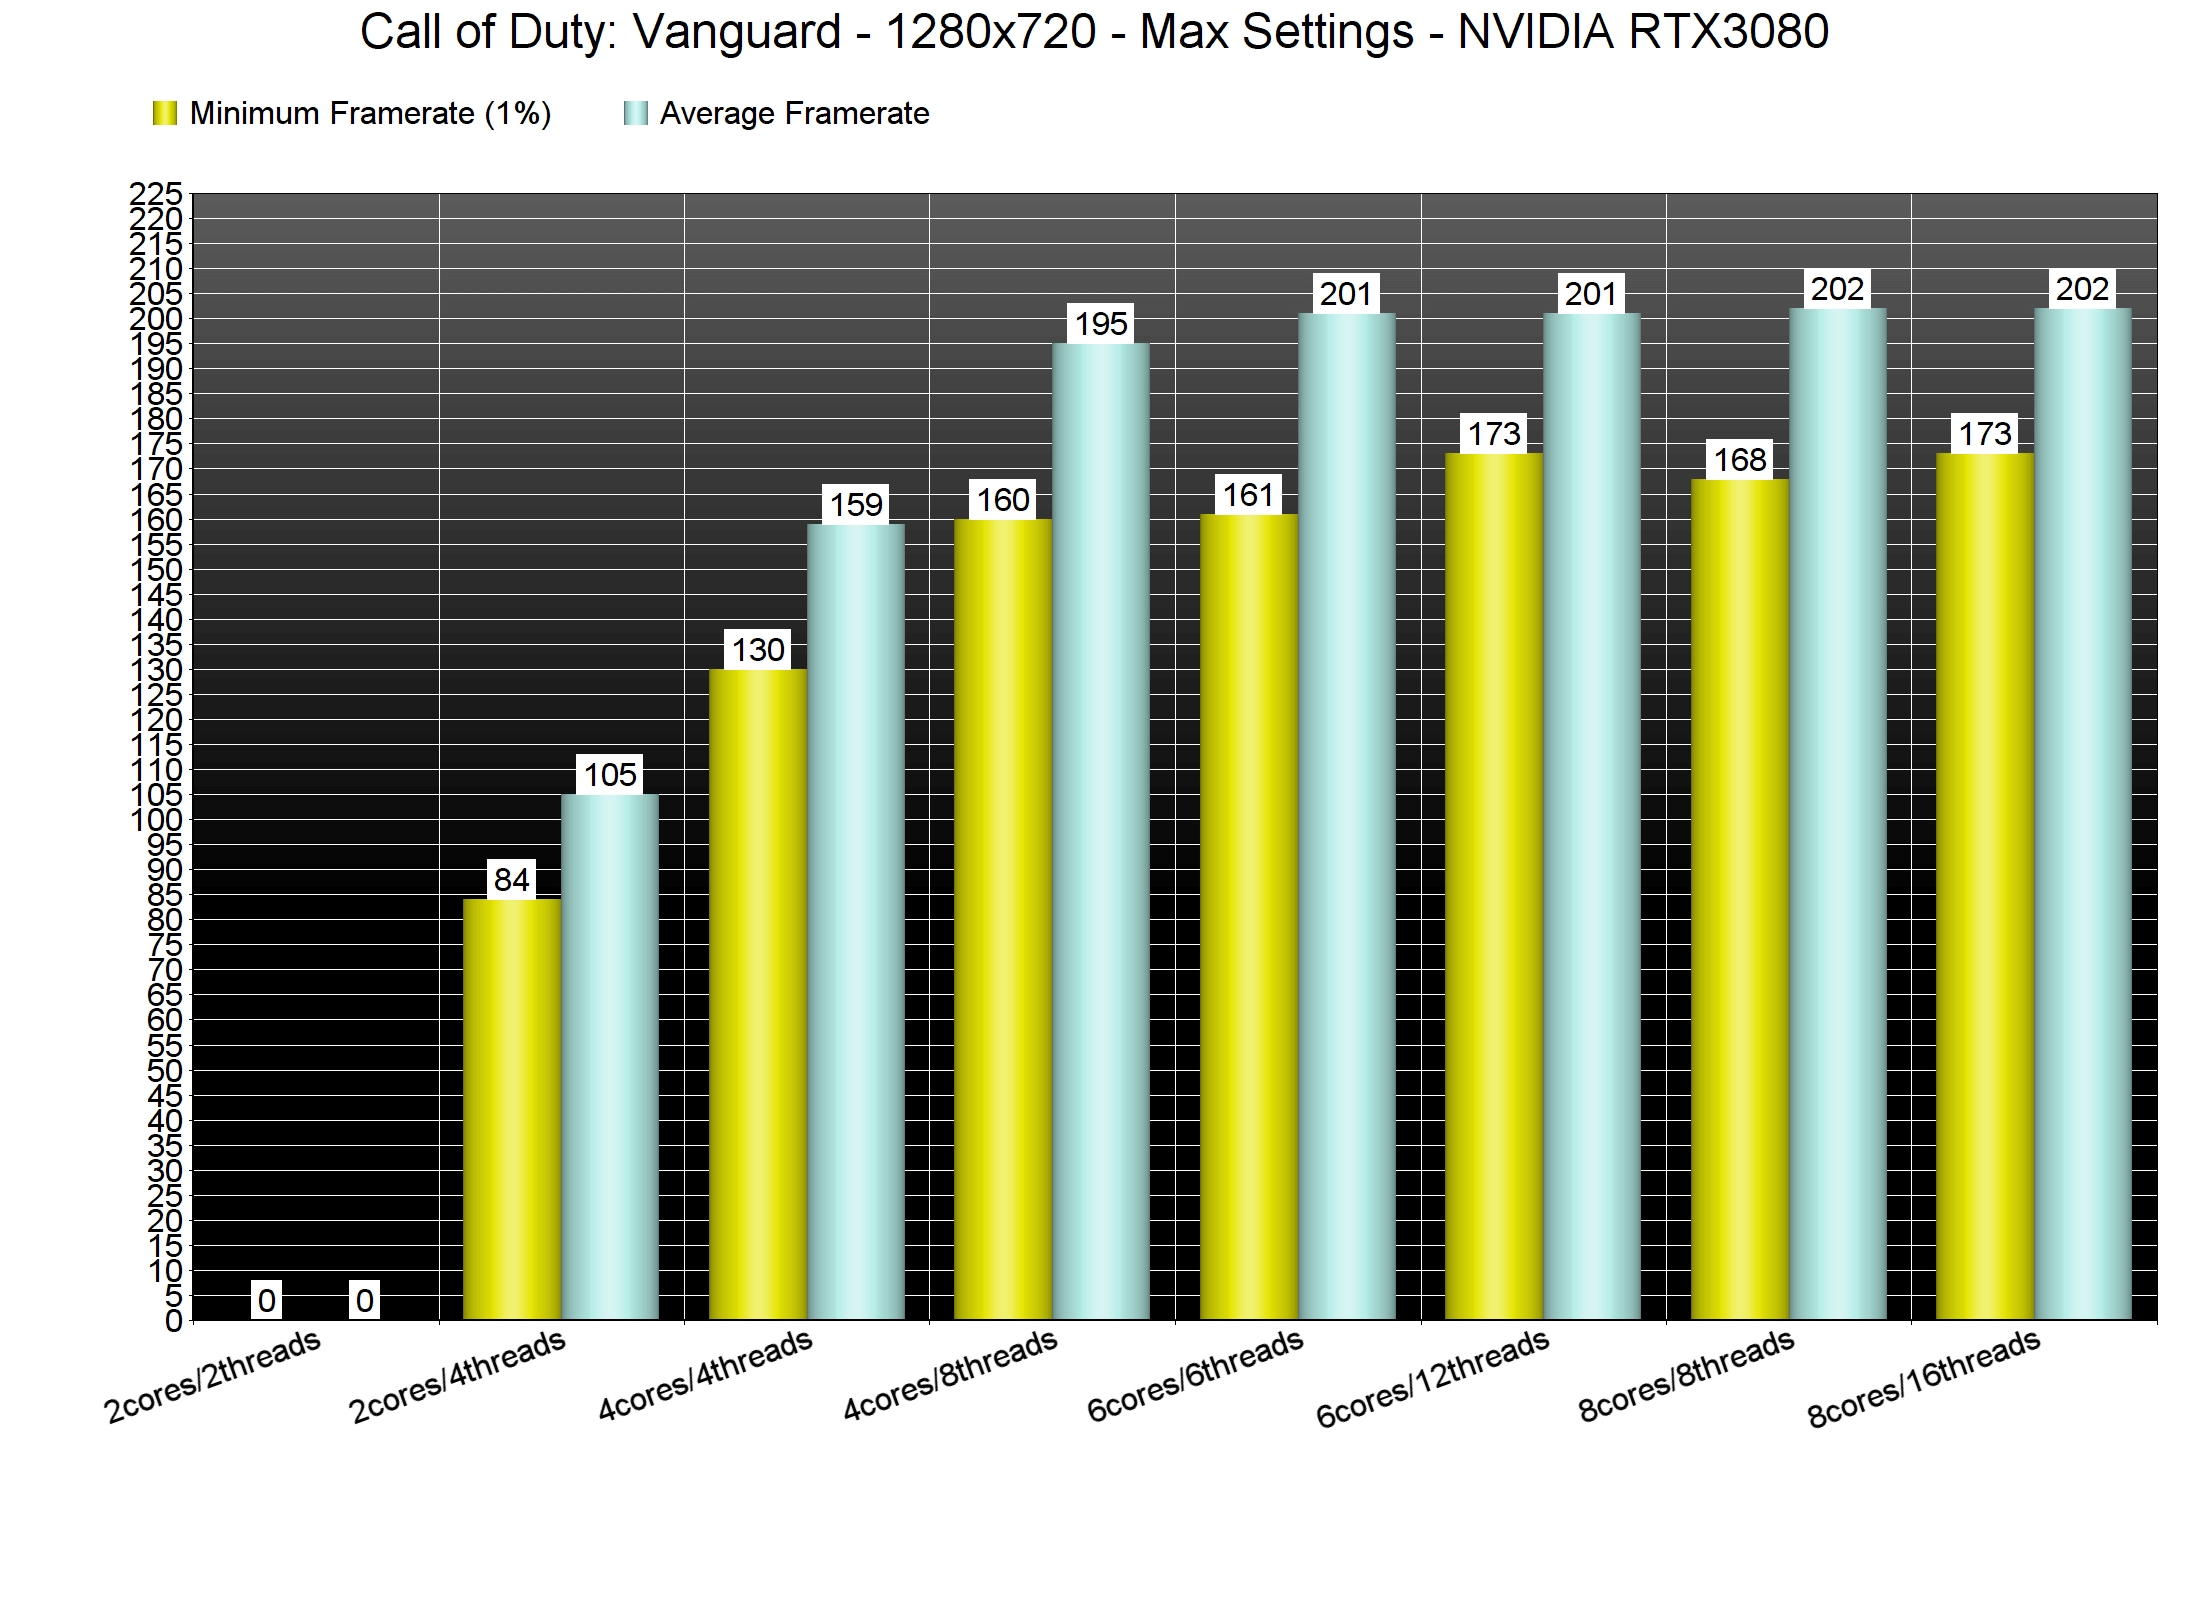 https://www.dsogaming.com/wp-content/uploads/2021/11/Call-of-Duty-Vanguard-CPU-benchmarks.png